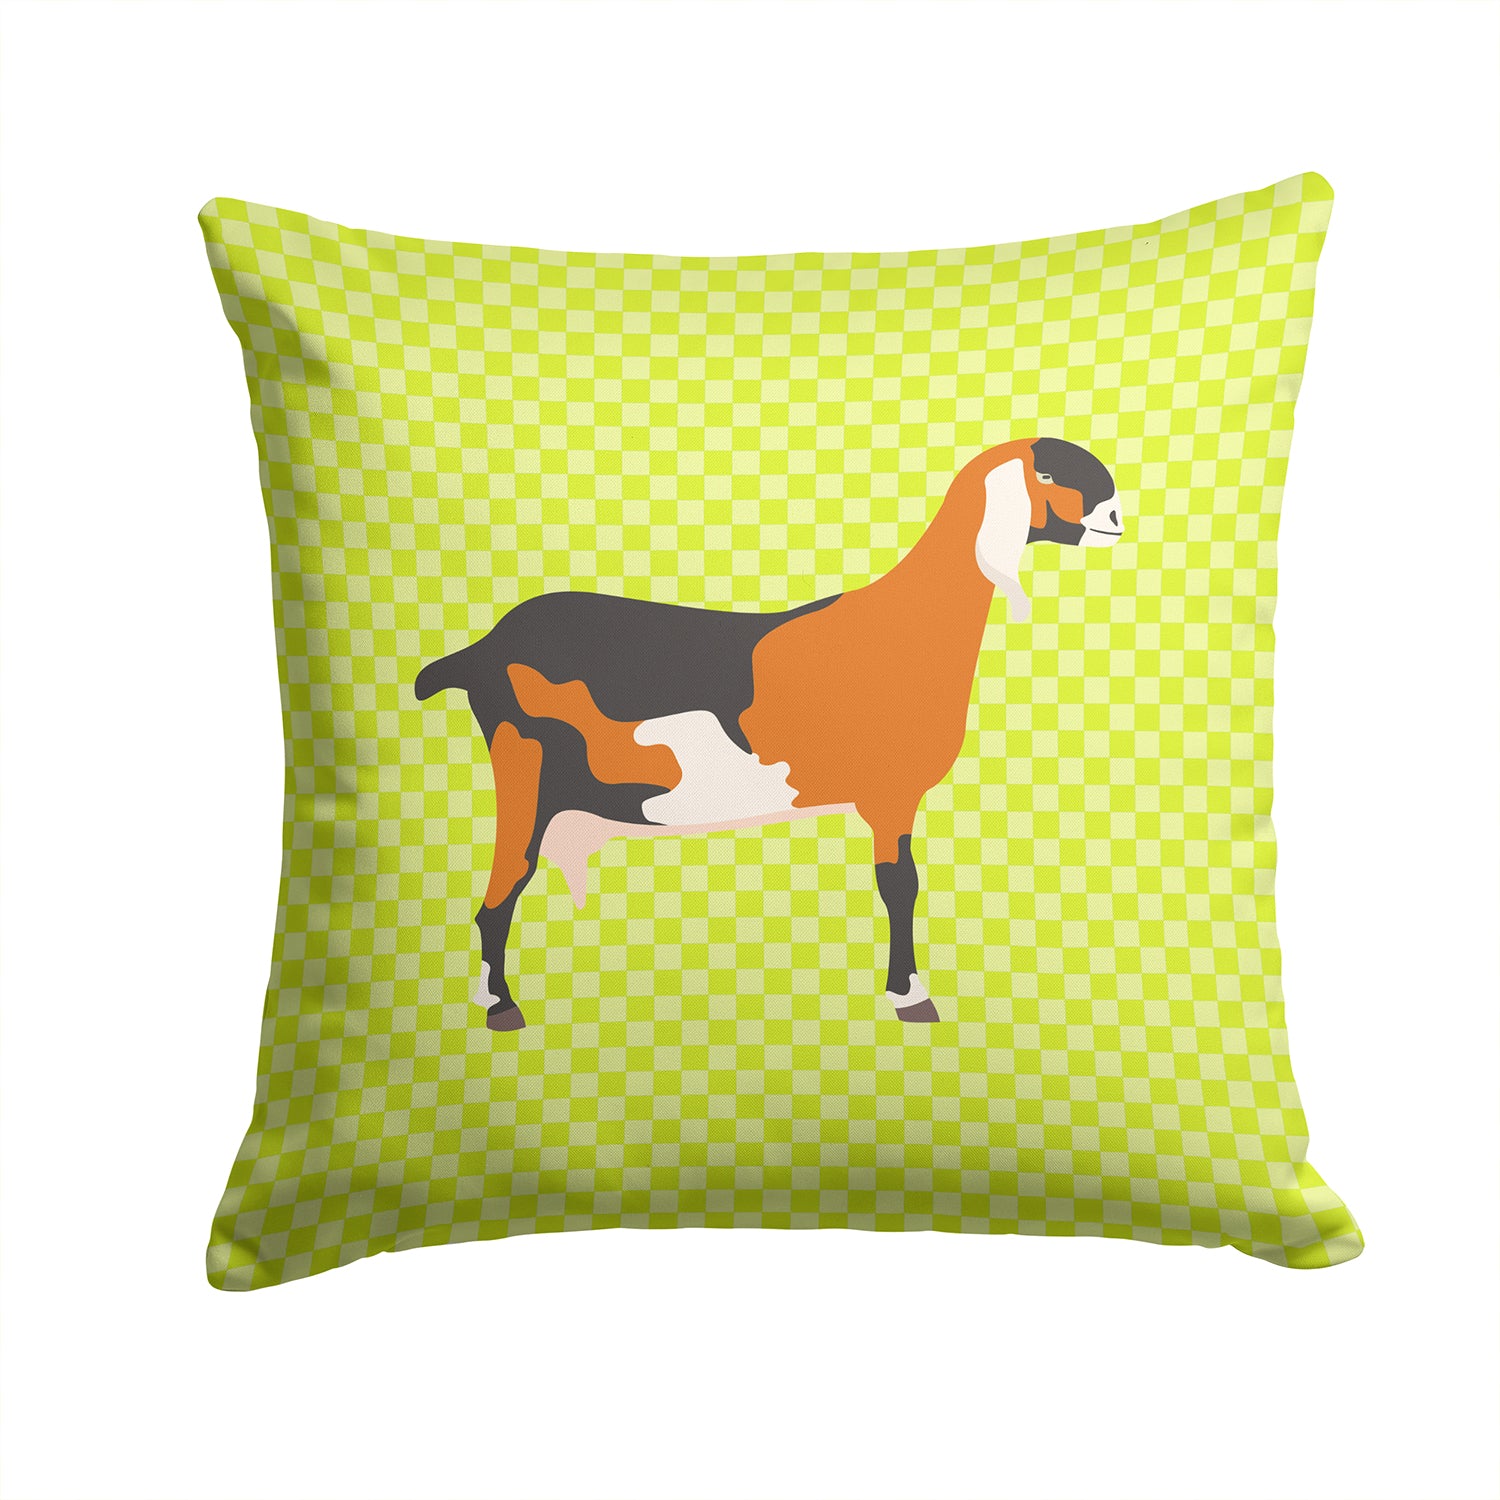 Anglo-nubian Nubian Goat Green Fabric Decorative Pillow BB7709PW1414 - the-store.com